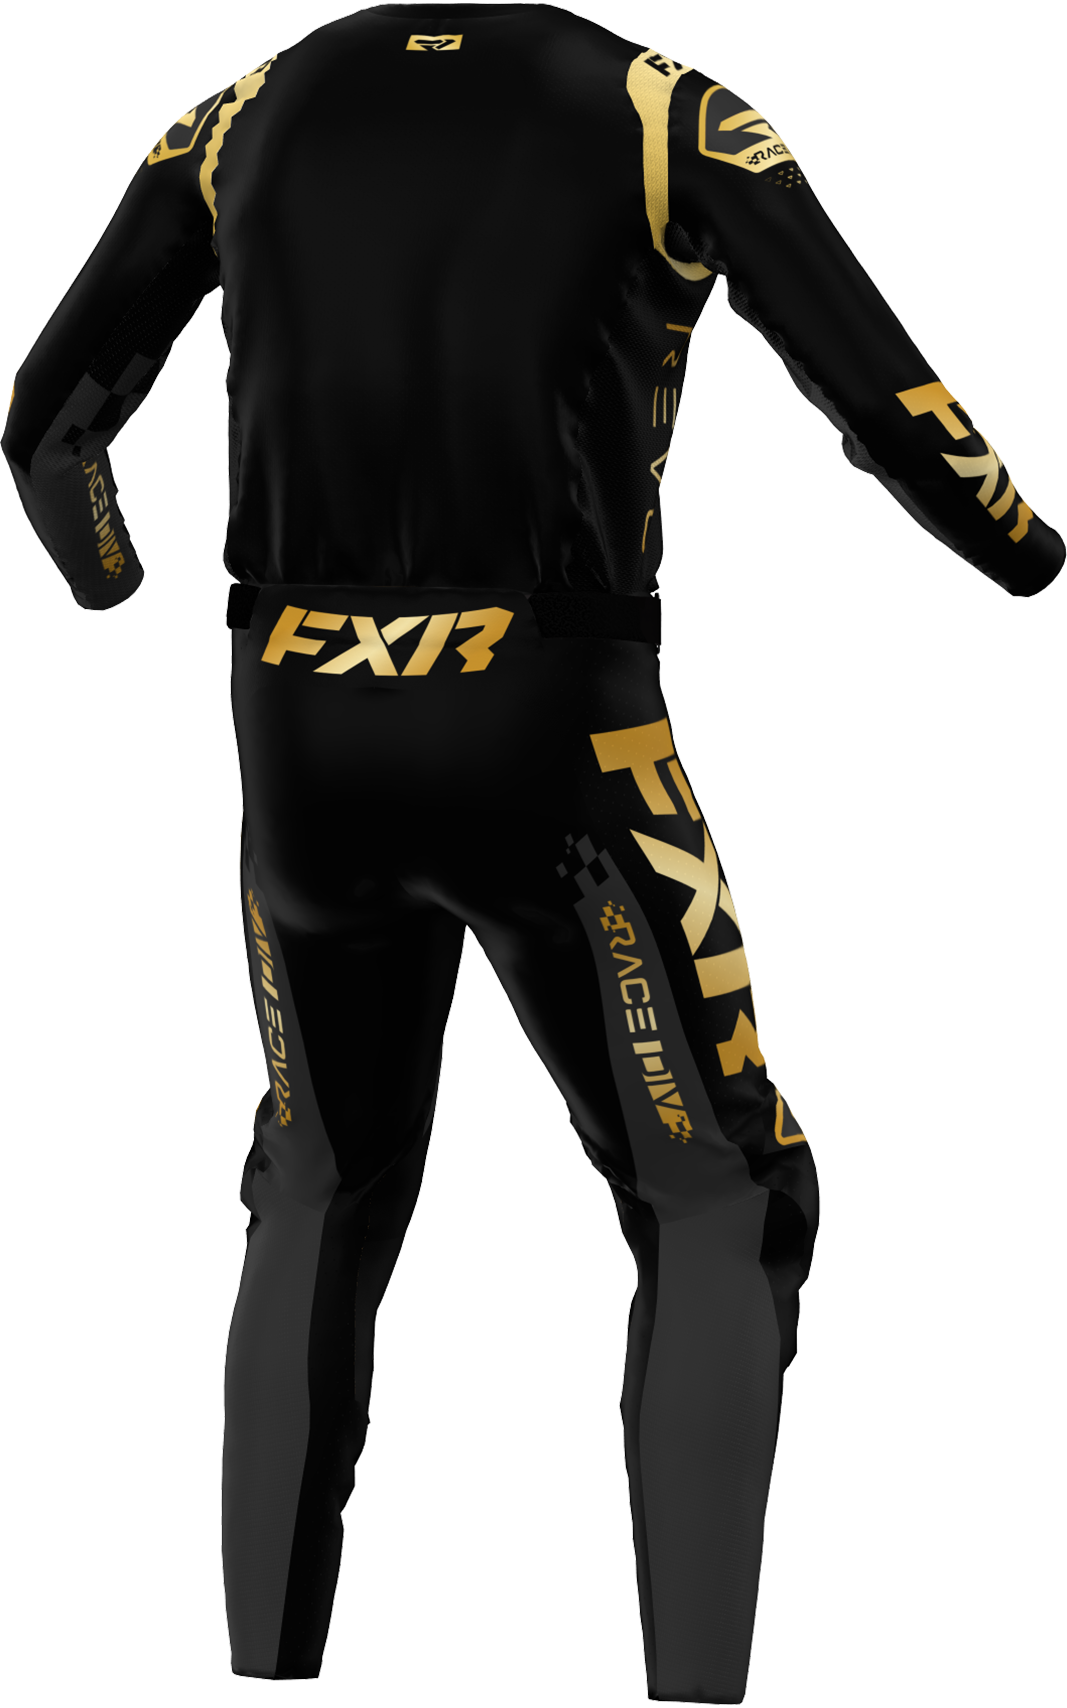 A 3D image of FXR's Revo Legend MX Jersey and Pant in Black/Gold colorway